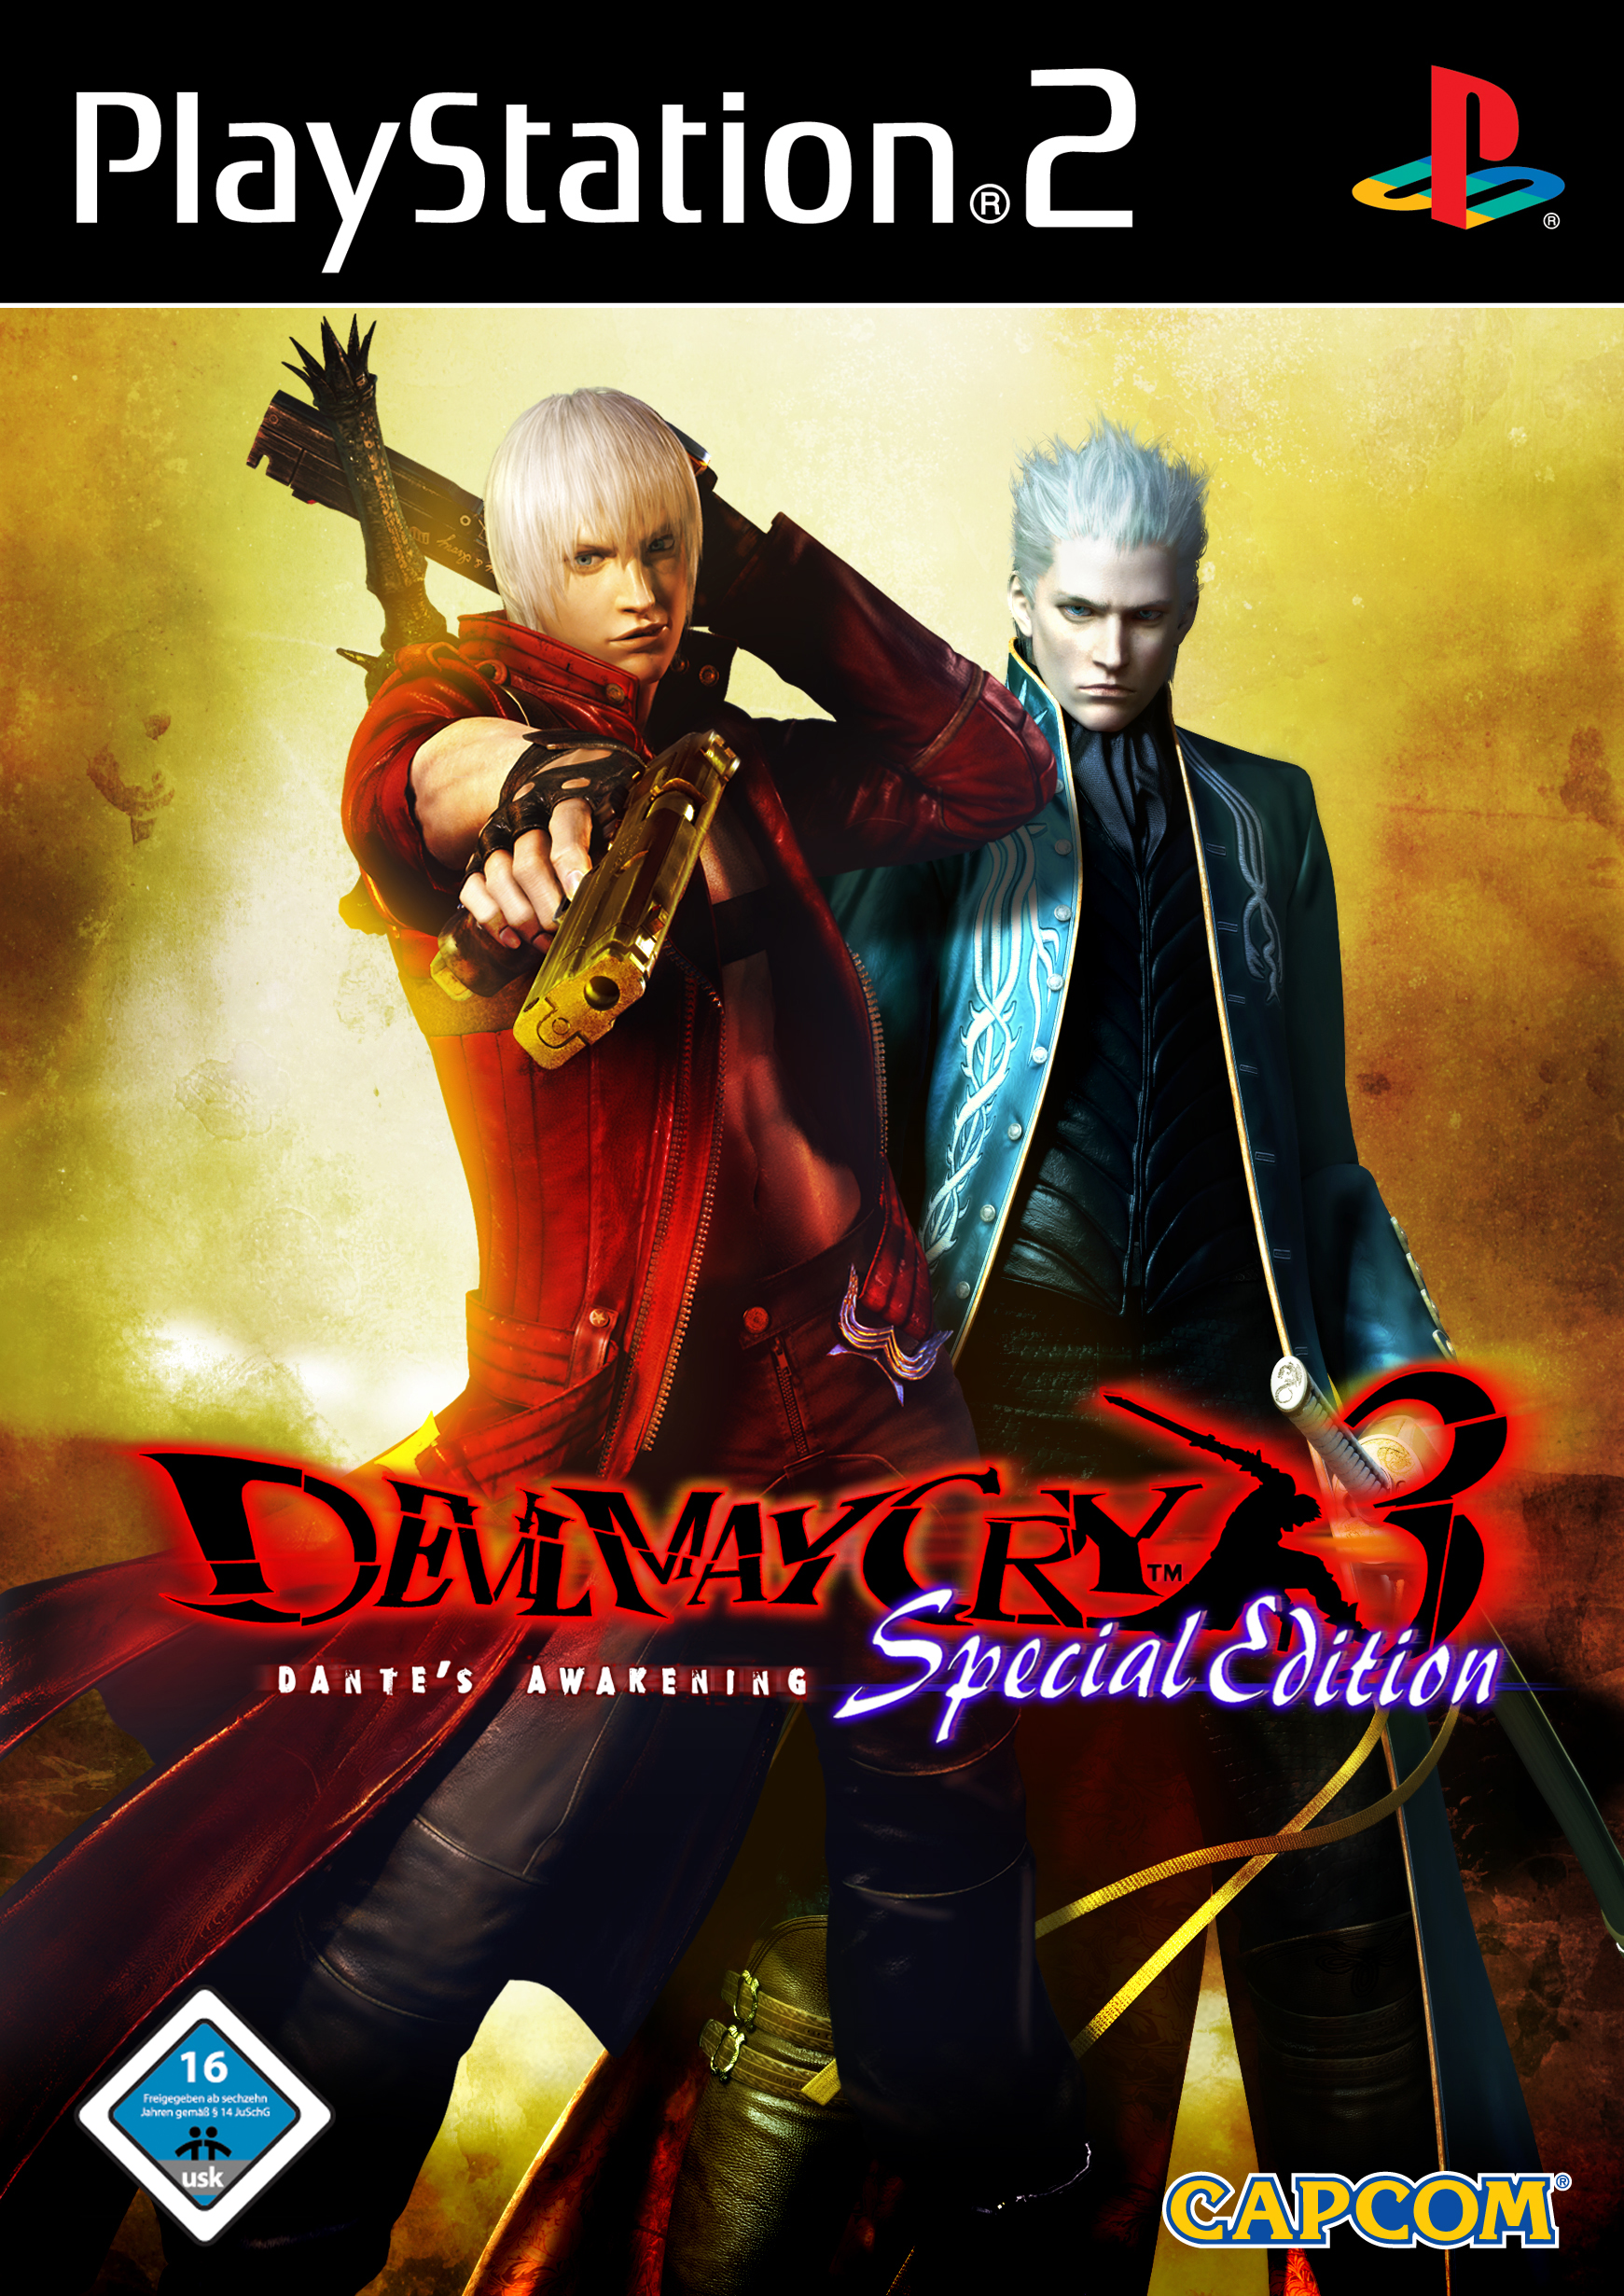 image-dmc3-special-edition-front-cover-jpg-devil-may-cry-wiki-fandom-powered-by-wikia